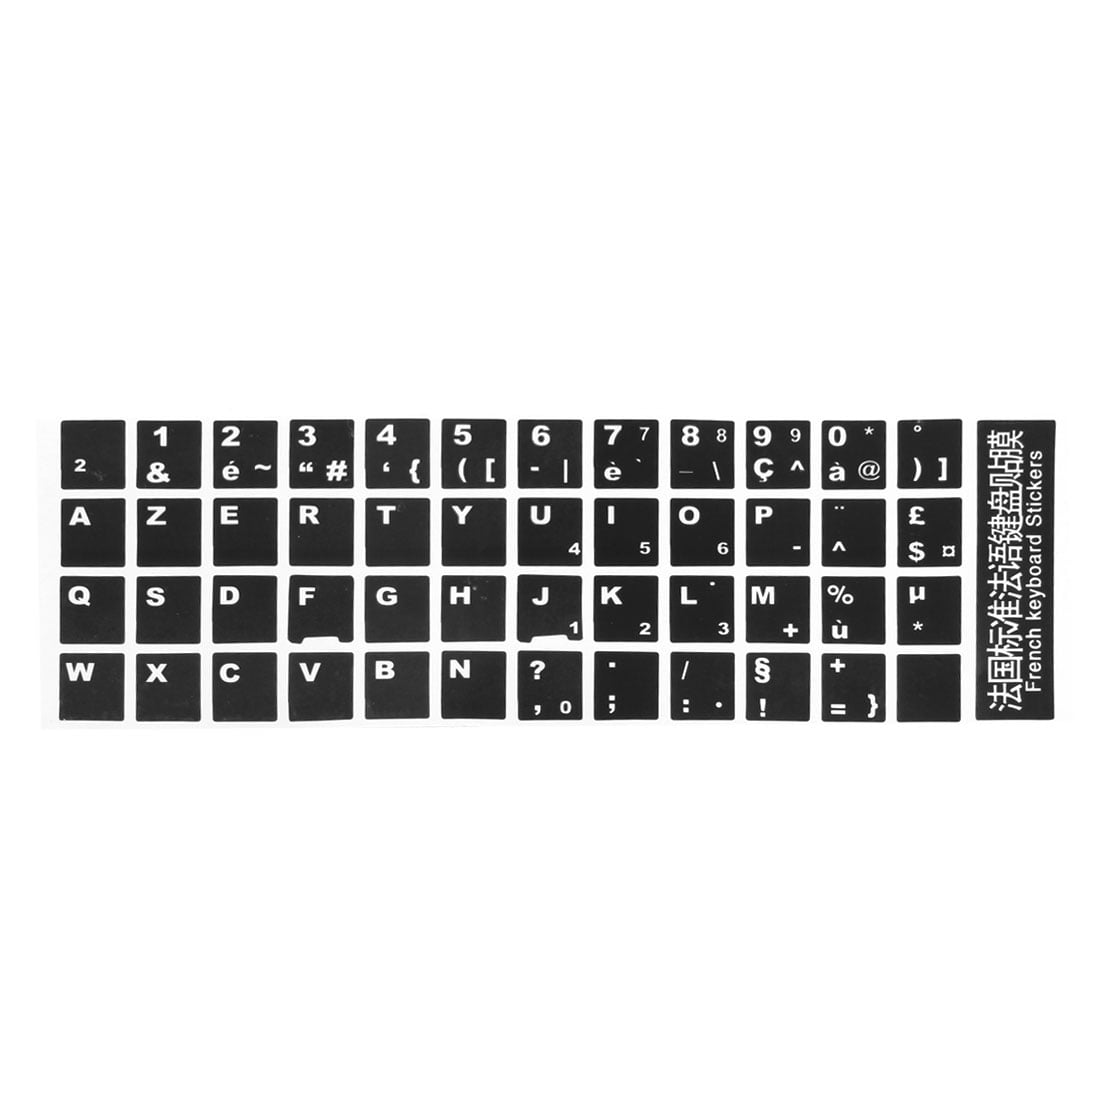 RUSSIAN-FRENCH AZERTY KEYBOARD STICKER NON TRANSPARENT BLACK FOR COMPUTER 